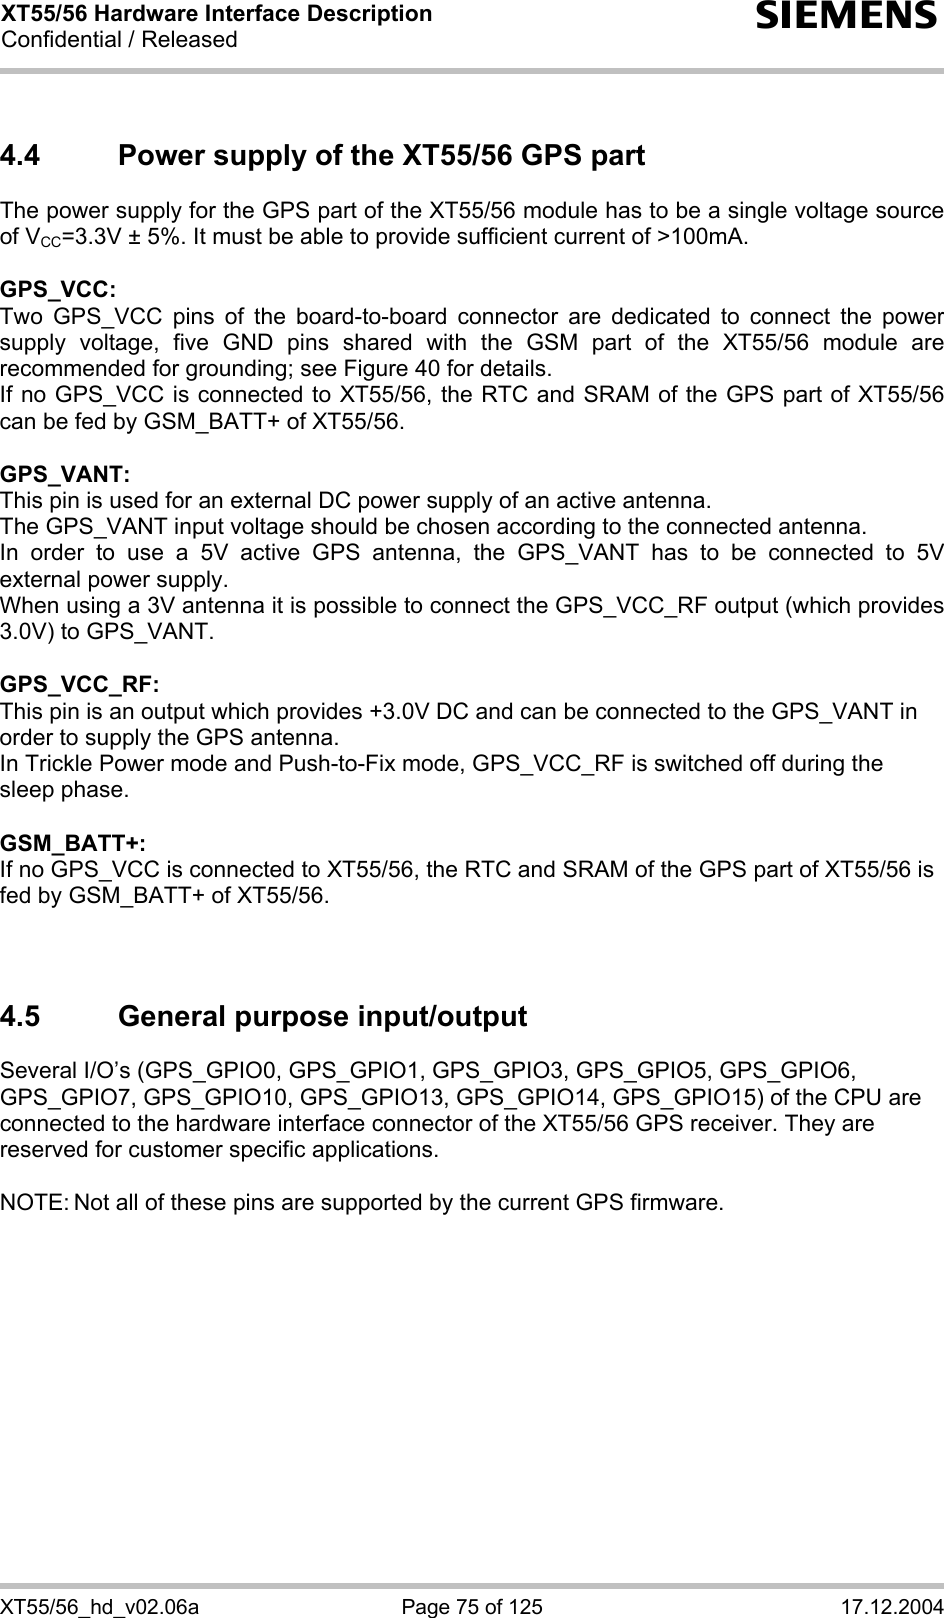 XT55/56 Hardware Interface Description Confidential / Released s XT55/56_hd_v02.06a  Page 75 of 125  17.12.2004 4.4  Power supply of the XT55/56 GPS part The power supply for the GPS part of the XT55/56 module has to be a single voltage source of VCC=3.3V ± 5%. It must be able to provide sufficient current of &gt;100mA.  GPS_VCC: Two GPS_VCC pins of the board-to-board connector are dedicated to connect the power supply voltage, five GND pins shared with the GSM part of the XT55/56 module are recommended for grounding; see Figure 40 for details.  If no GPS_VCC is connected to XT55/56, the RTC and SRAM of the GPS part of XT55/56 can be fed by GSM_BATT+ of XT55/56.  GPS_VANT: This pin is used for an external DC power supply of an active antenna. The GPS_VANT input voltage should be chosen according to the connected antenna. In order to use a 5V active GPS antenna, the GPS_VANT has to be connected to 5V external power supply. When using a 3V antenna it is possible to connect the GPS_VCC_RF output (which provides 3.0V) to GPS_VANT.  GPS_VCC_RF: This pin is an output which provides +3.0V DC and can be connected to the GPS_VANT in order to supply the GPS antenna.  In Trickle Power mode and Push-to-Fix mode, GPS_VCC_RF is switched off during the sleep phase.  GSM_BATT+: If no GPS_VCC is connected to XT55/56, the RTC and SRAM of the GPS part of XT55/56 is fed by GSM_BATT+ of XT55/56.    4.5  General purpose input/output Several I/O’s (GPS_GPIO0, GPS_GPIO1, GPS_GPIO3, GPS_GPIO5, GPS_GPIO6, GPS_GPIO7, GPS_GPIO10, GPS_GPIO13, GPS_GPIO14, GPS_GPIO15) of the CPU are connected to the hardware interface connector of the XT55/56 GPS receiver. They are reserved for customer specific applications.  NOTE: Not all of these pins are supported by the current GPS firmware.  